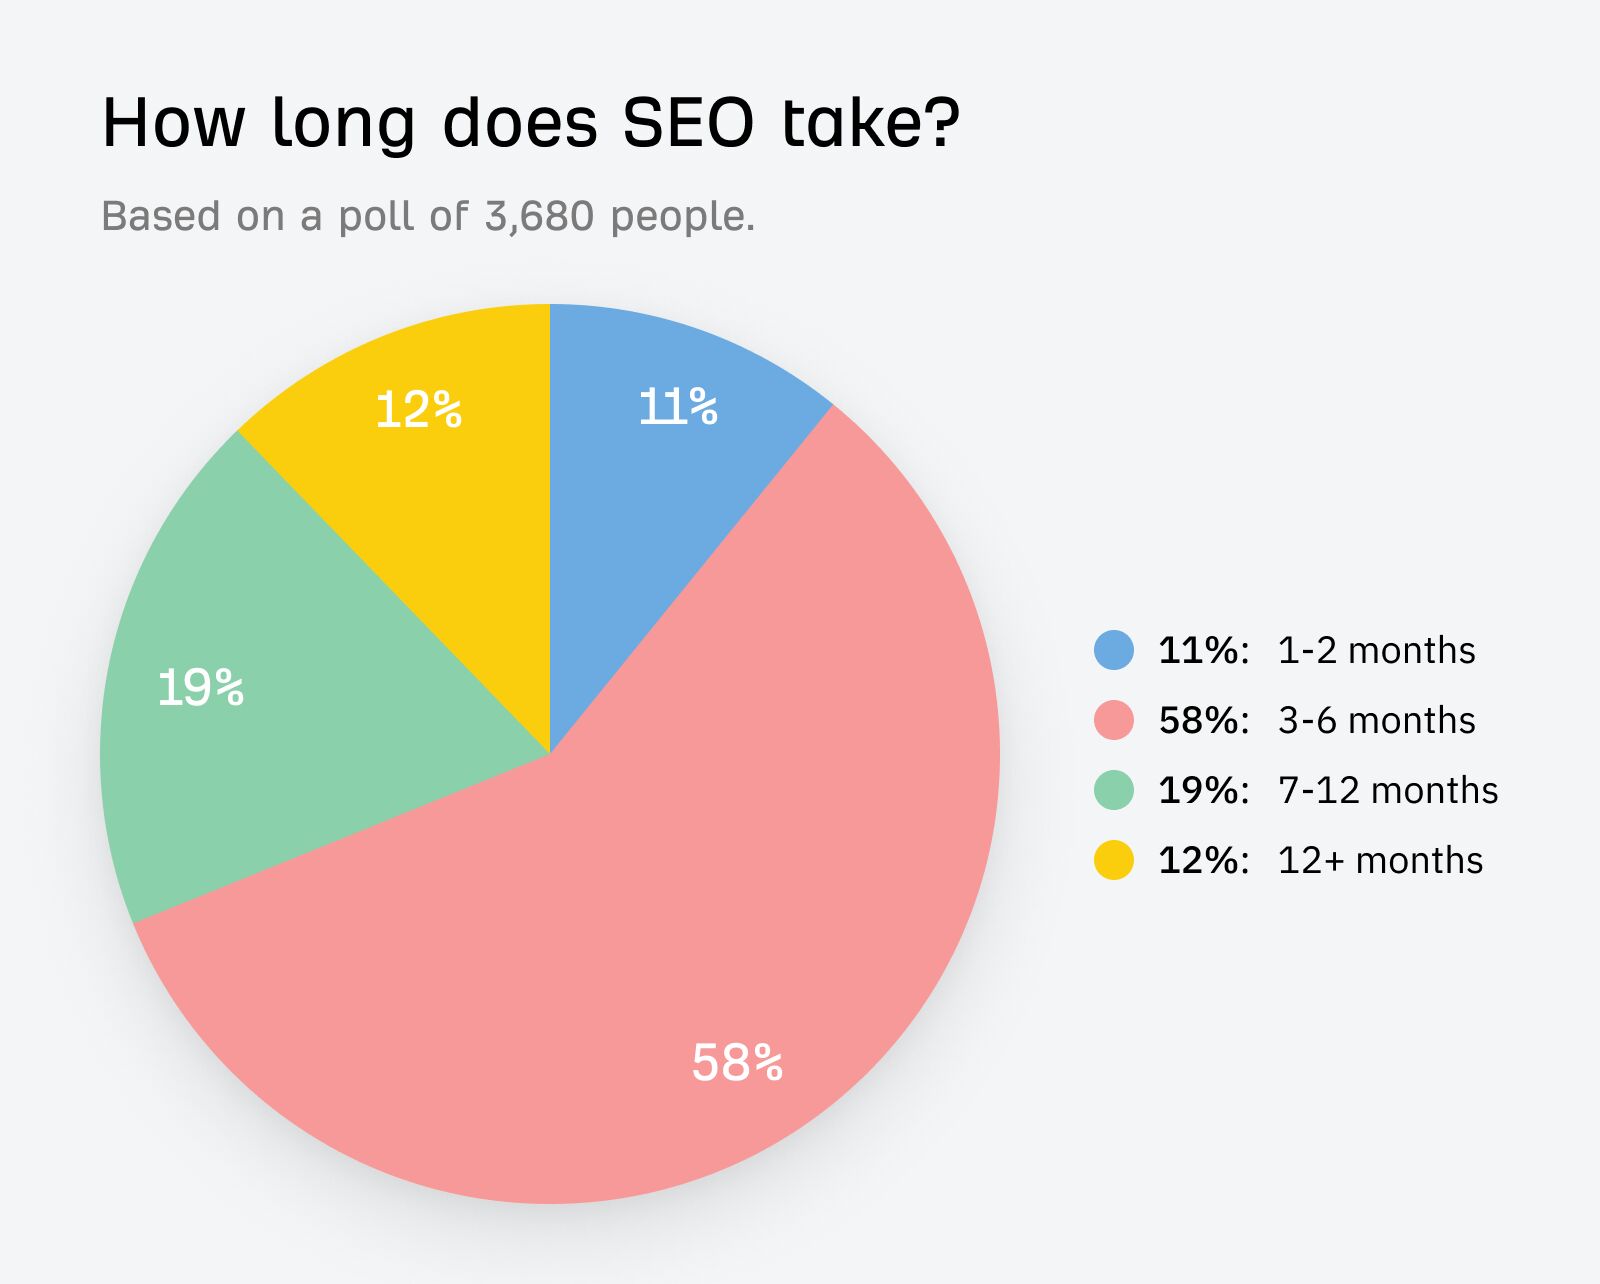 A pie chart showing how long SEO takes